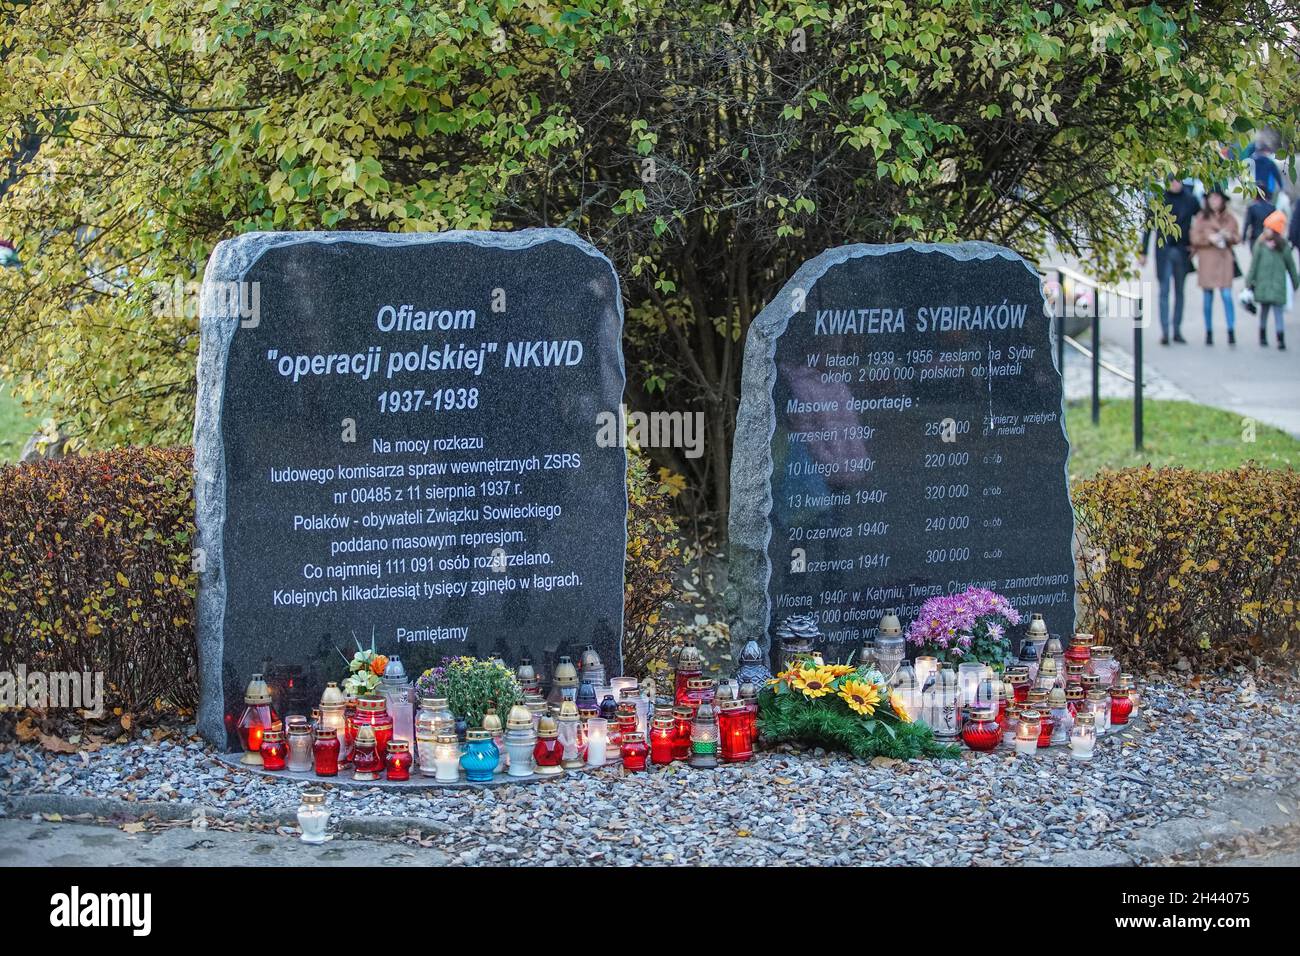 Gdansk, Poland 31st, Oct. 2021 People visiting graves of their relatives at the Lostowicki Cemetery are seen. Christian people celebrate All Saints Day (Wszystkich Swietych), pay respect to the dead family members, lay flowers and lit candles on their graves. All Saints' Day on 1 November and All Souls' Day on 2 November are when millions of Poles visit the graves of loved ones, often travelling hundreds of kilometres to their home towns. In 2021 as the 1st Nov is on Monday many of people visit graves on the weekend preceding that day. (Photo by Vadim Pacajev/Sipa USA) Stock Photo